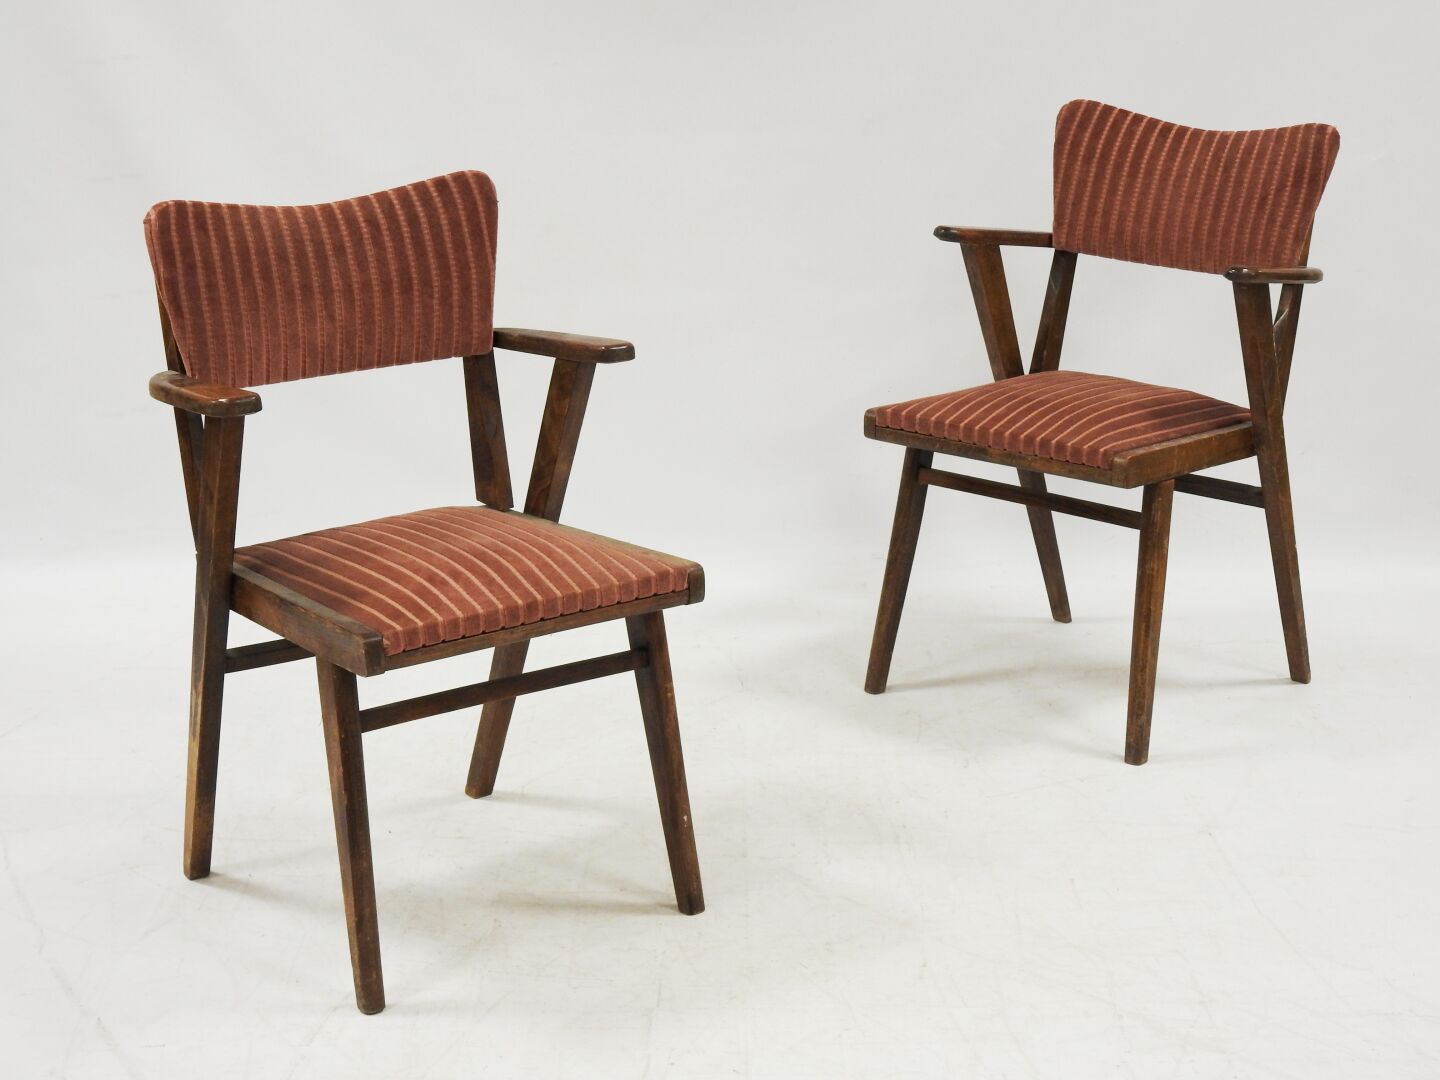 Null Work from the 50's
Pair of architectural chairs in natural wood, pink velve&hellip;